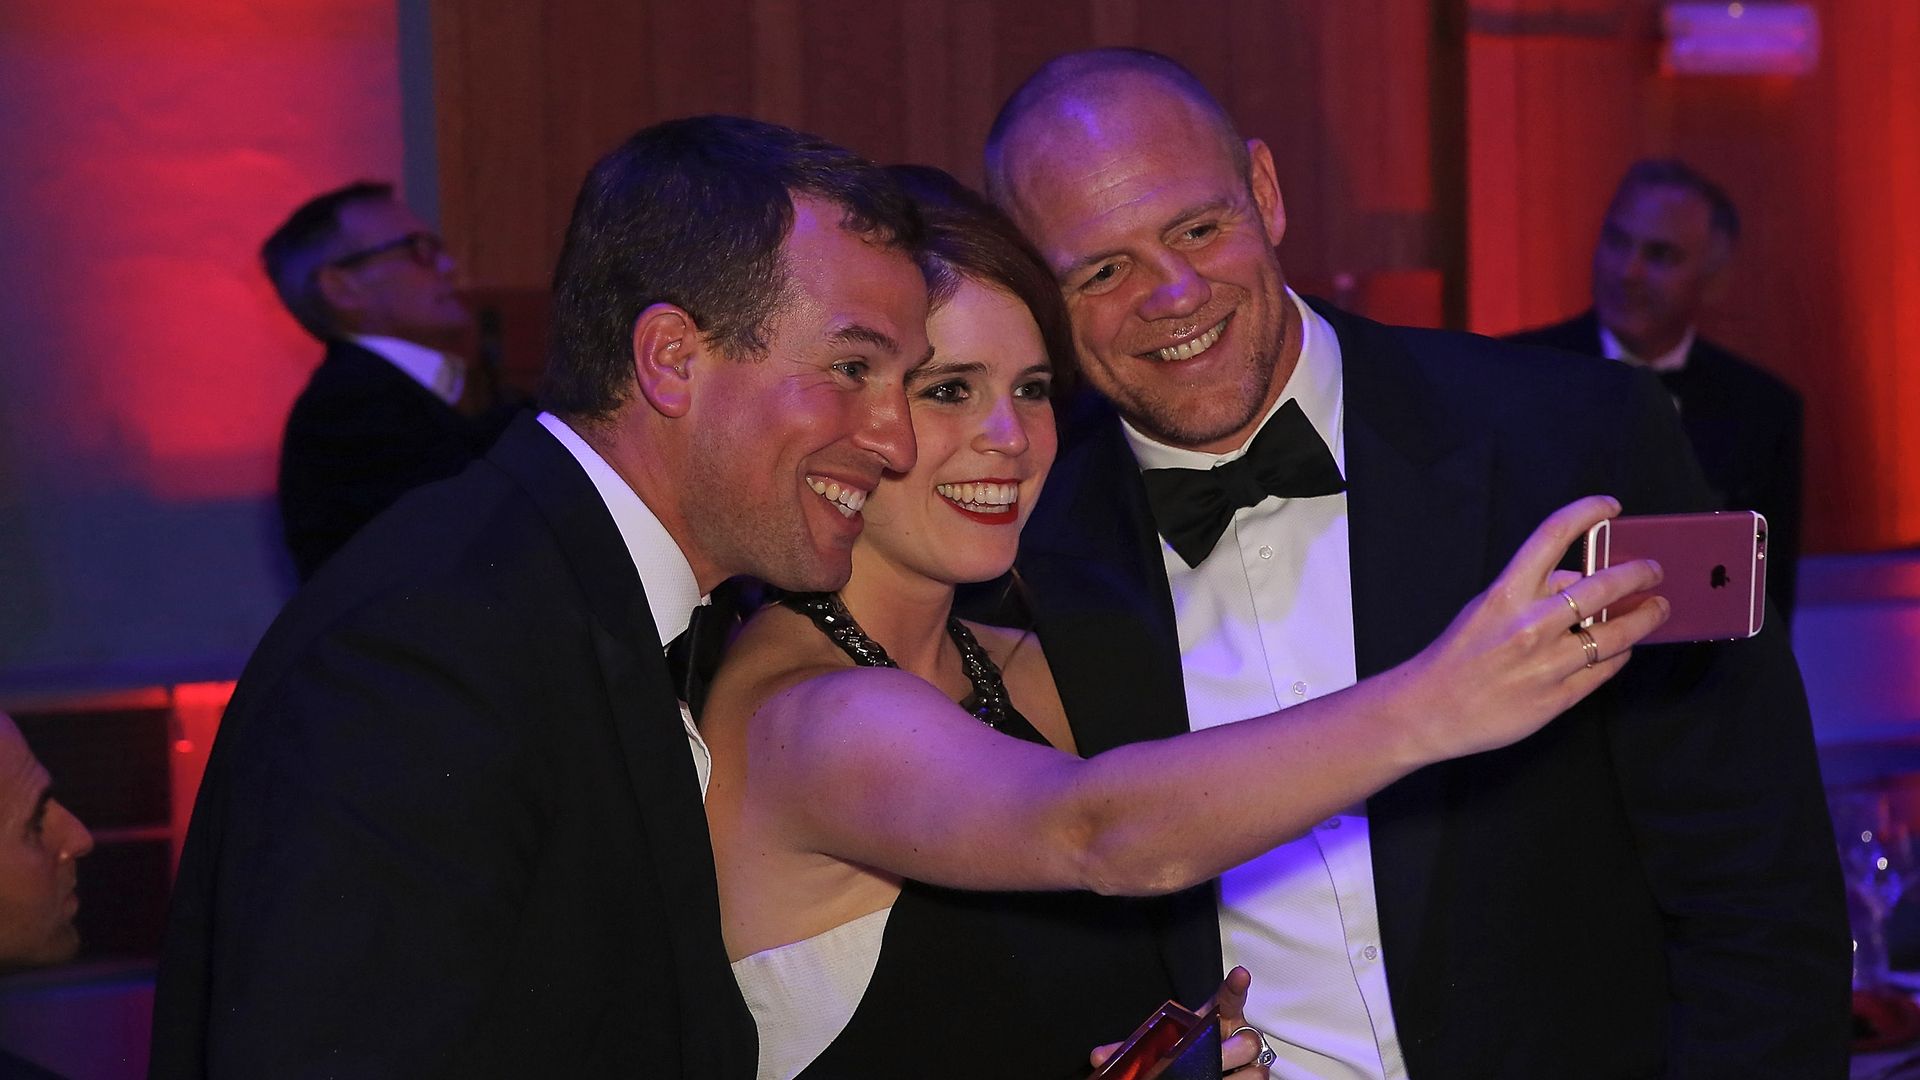 Peter Philips, Princess Eugenie and Mike Tindall take a selfie